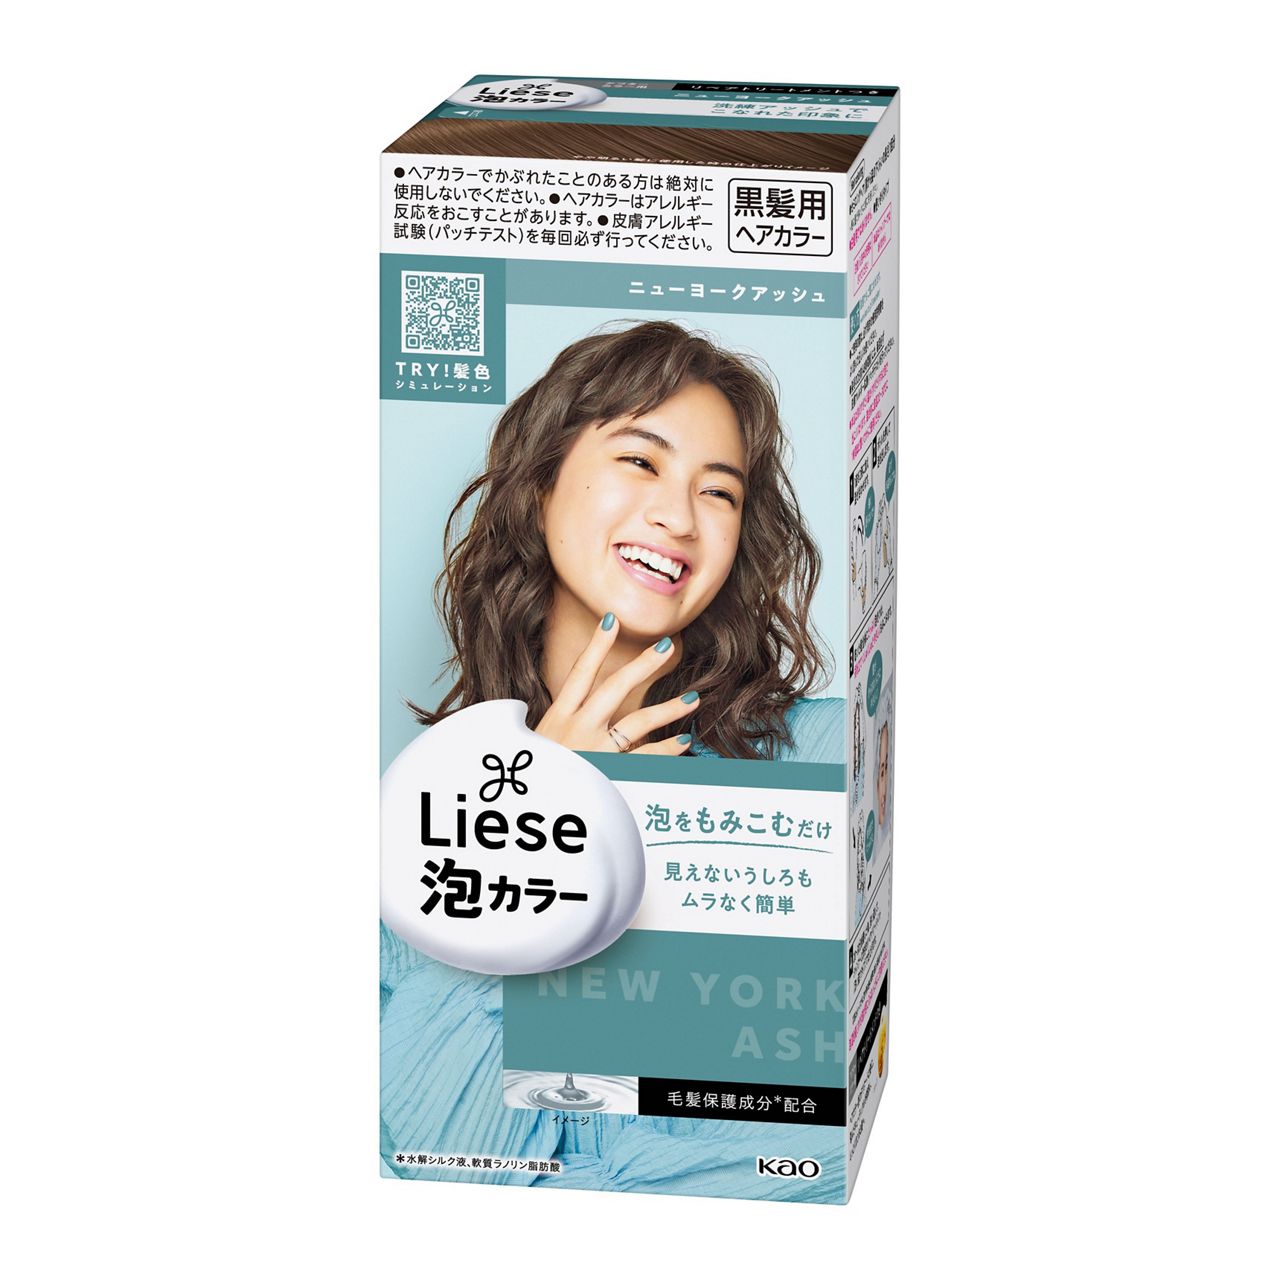 Liese Kao Bubble Hair Color Prettia - New York Ash - Harajuku Culture Japan - Japanease Products Store Beauty and Stationery